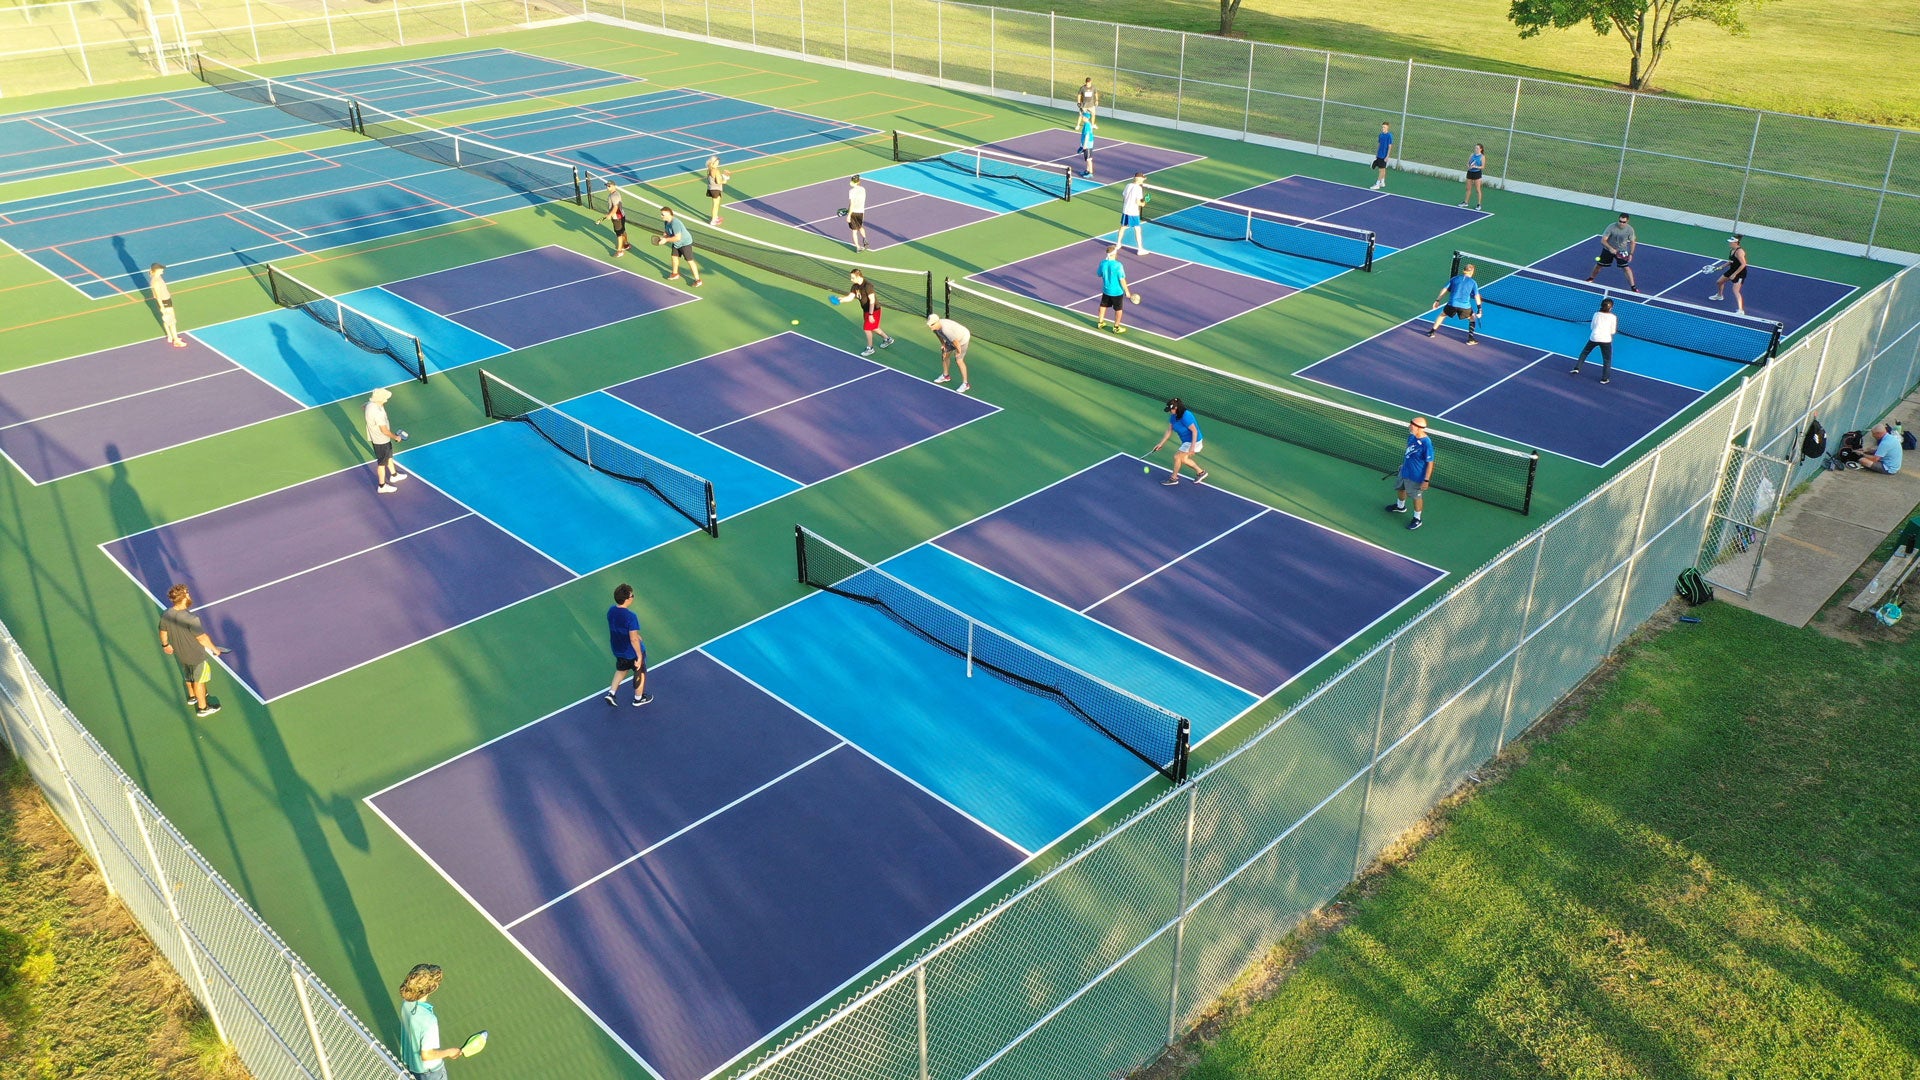 Beginners playing pickleball on 6 outdoor courts using graphite pickleball paddles 